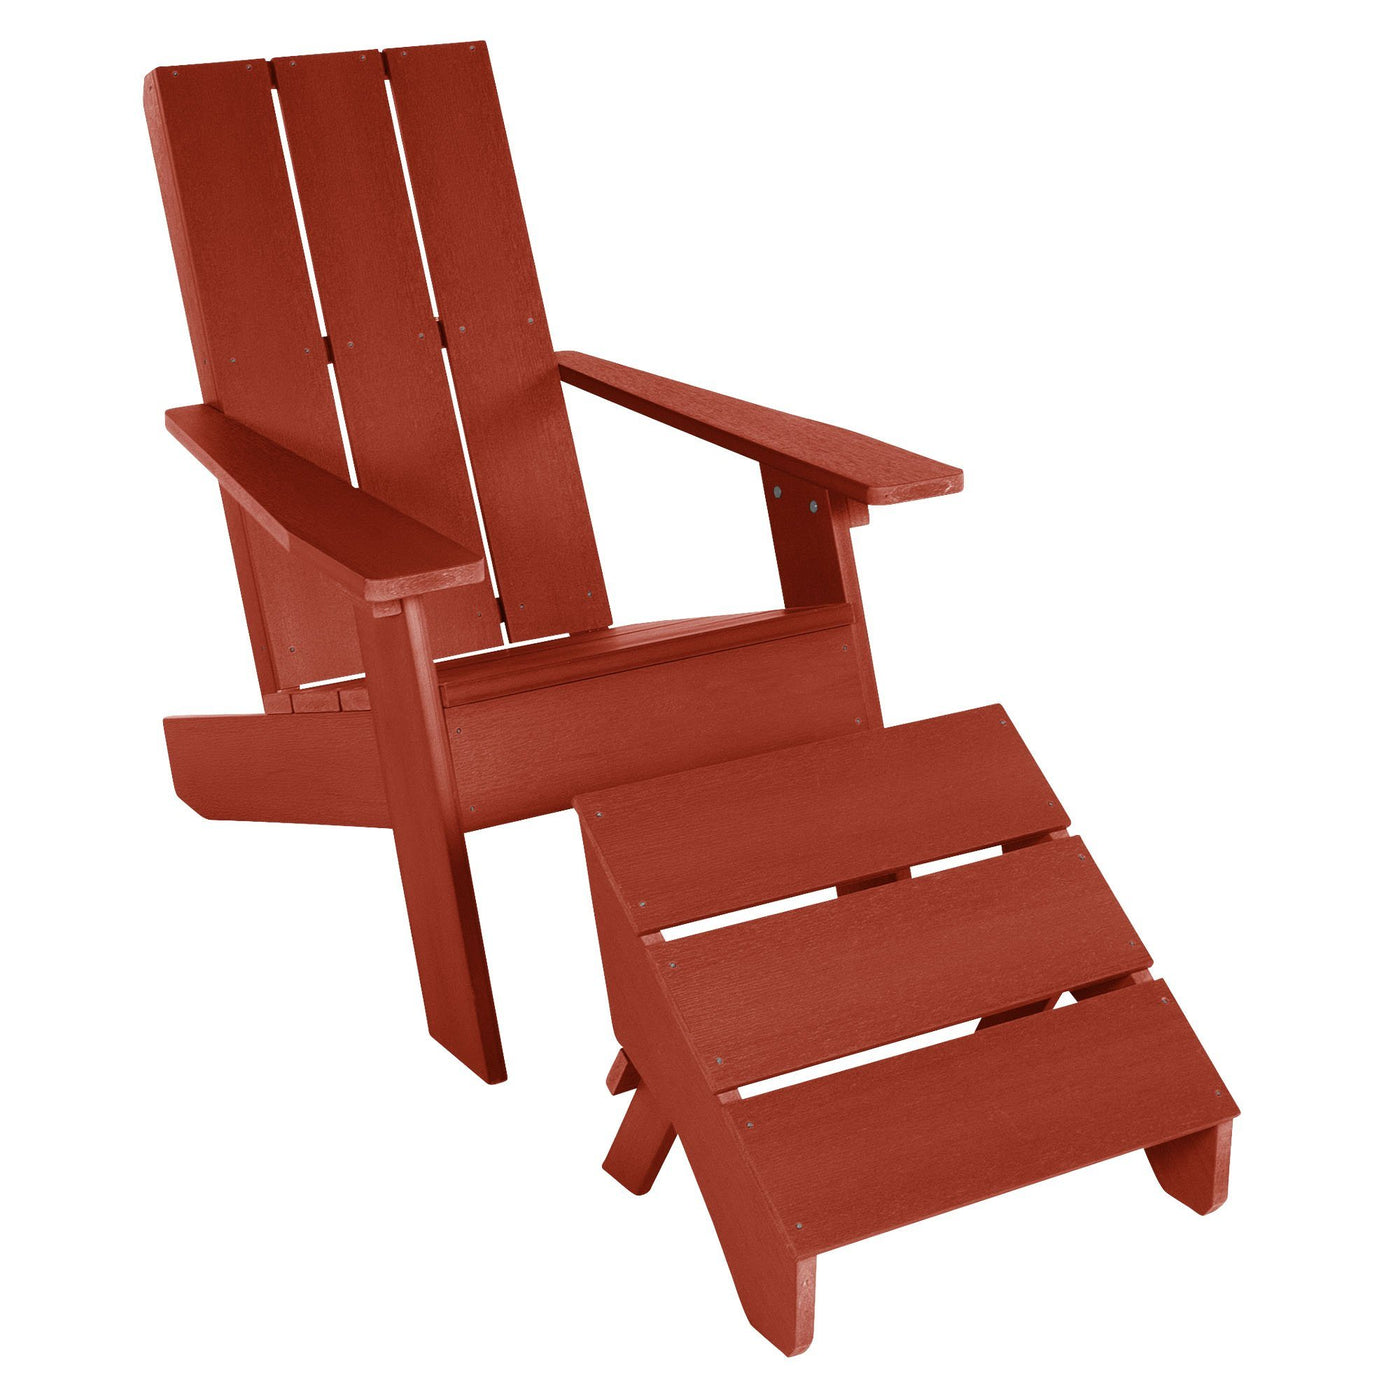 Italica Modern Adirondack chair and Ottoman in Rustic Red